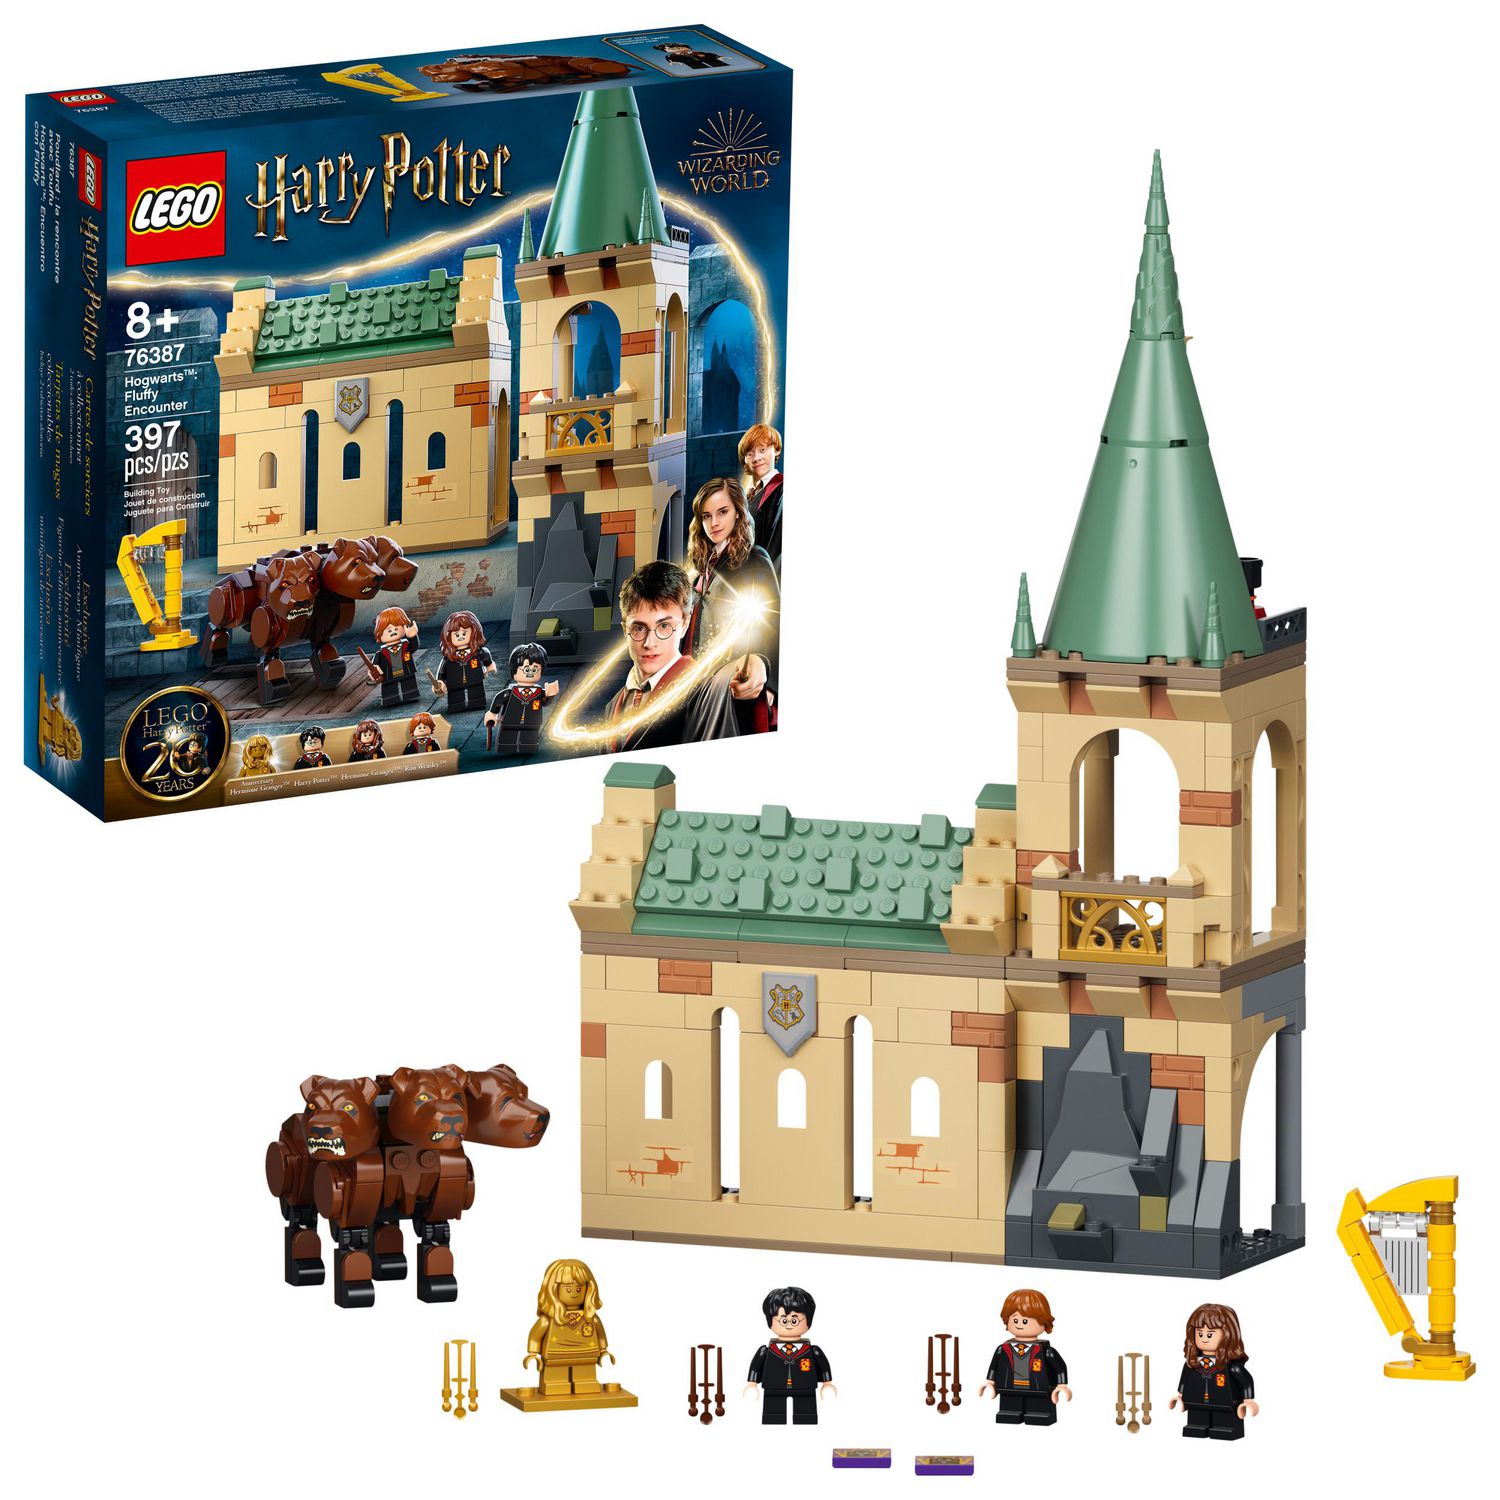 LEGO Harry Potter and The Goblet of Fire Hogwarts Castle Clock Tower 75948  Playset 